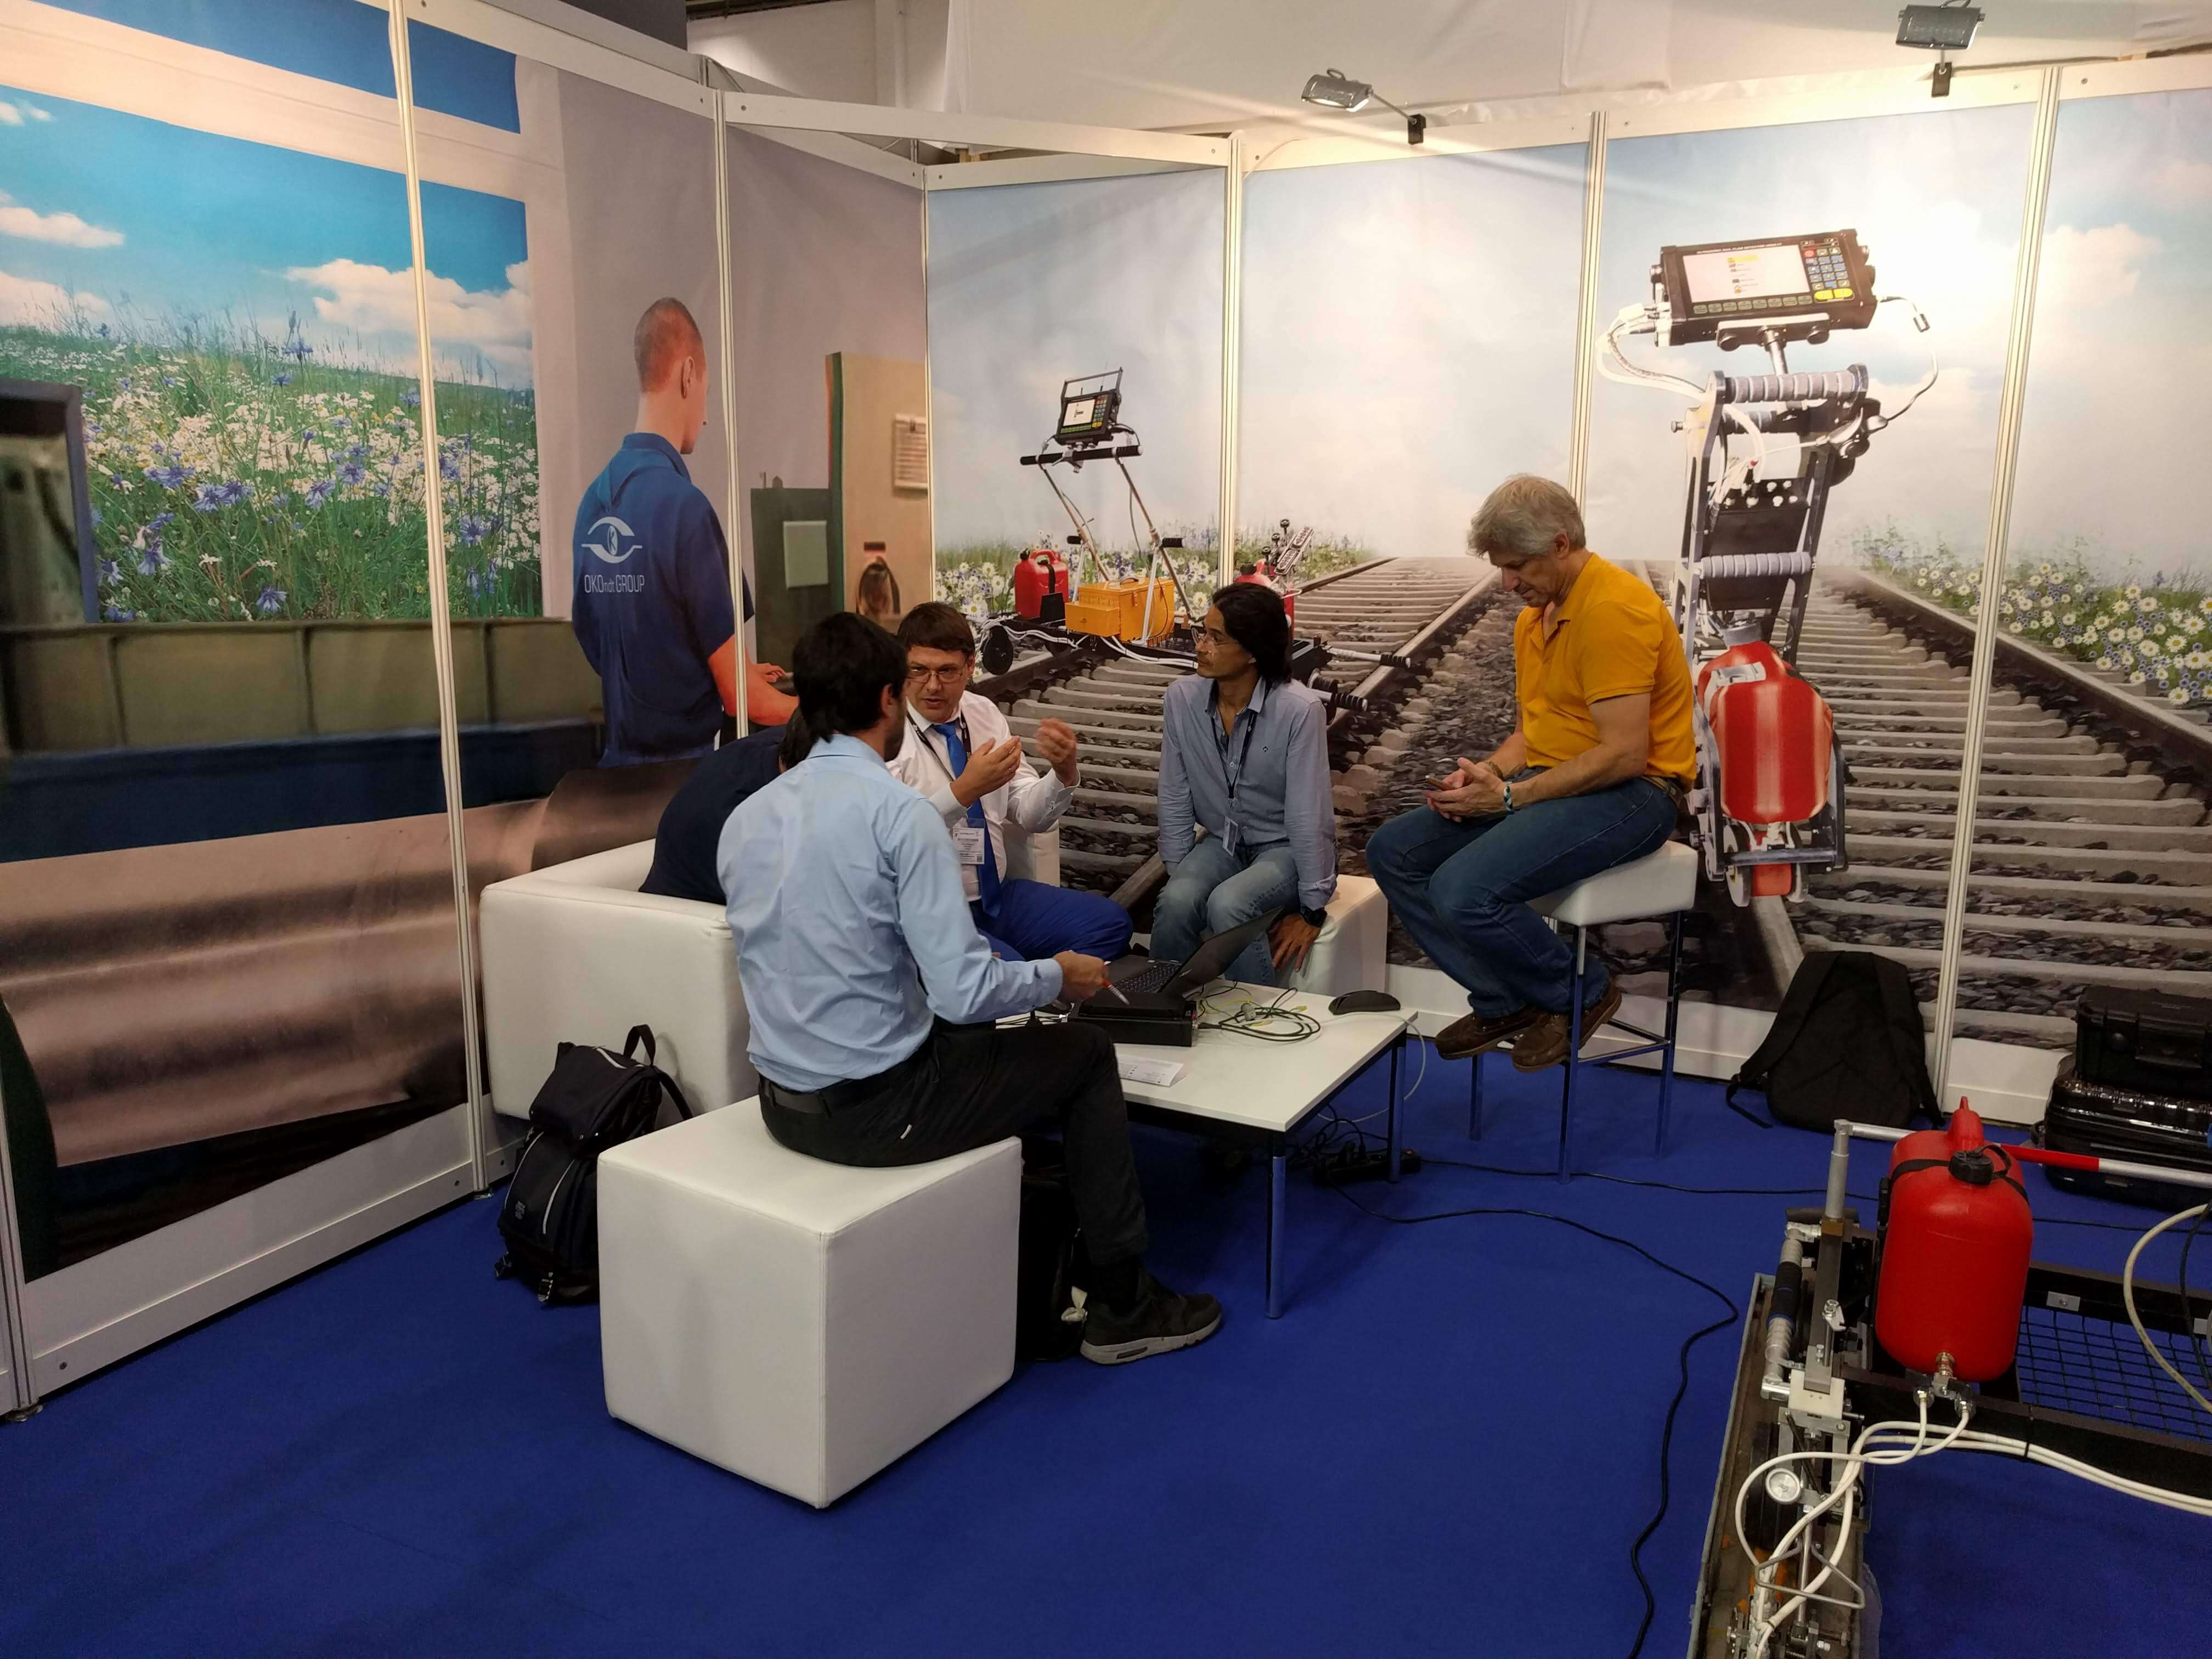 Demonstration and discussion of capabilities of OKOndt GROUP's equipment with interested visitors of the booth